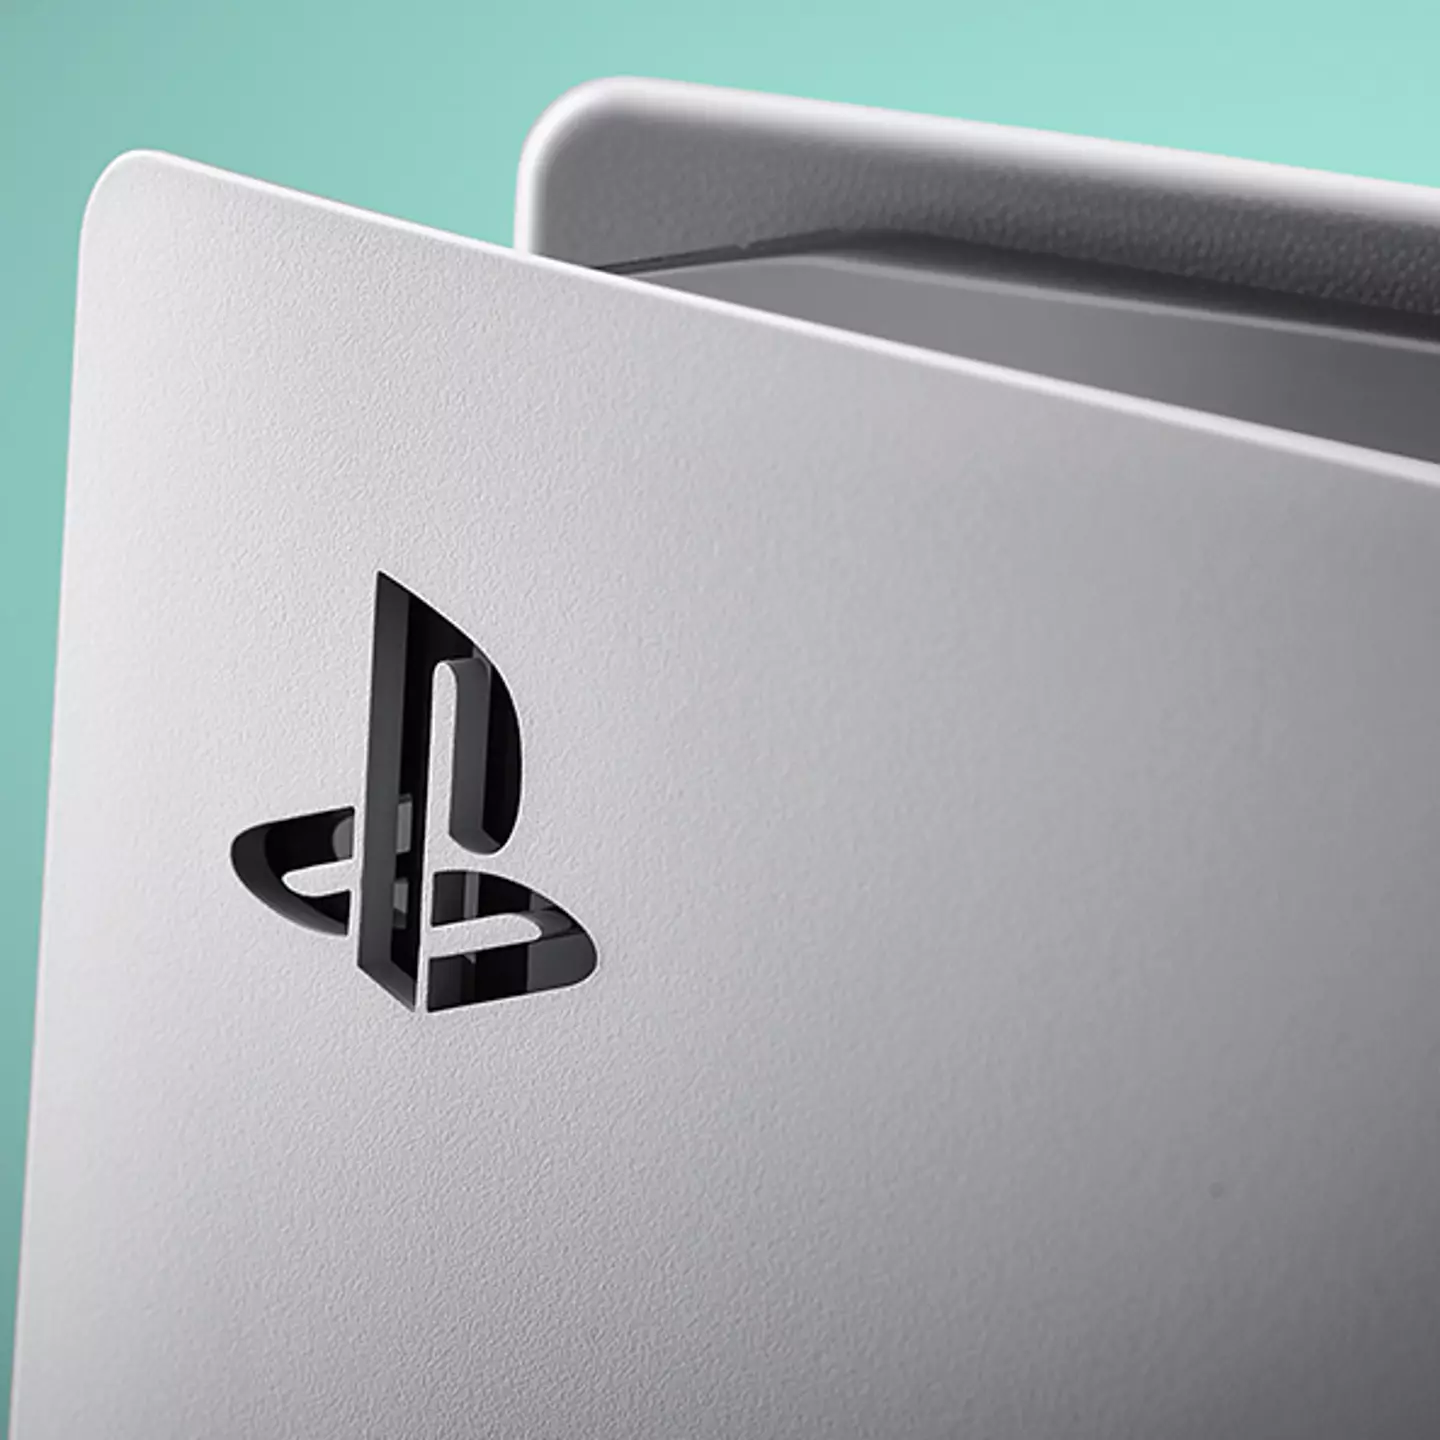 PlayStation 5 is entering ‘the latter stages of its life’, Sony says